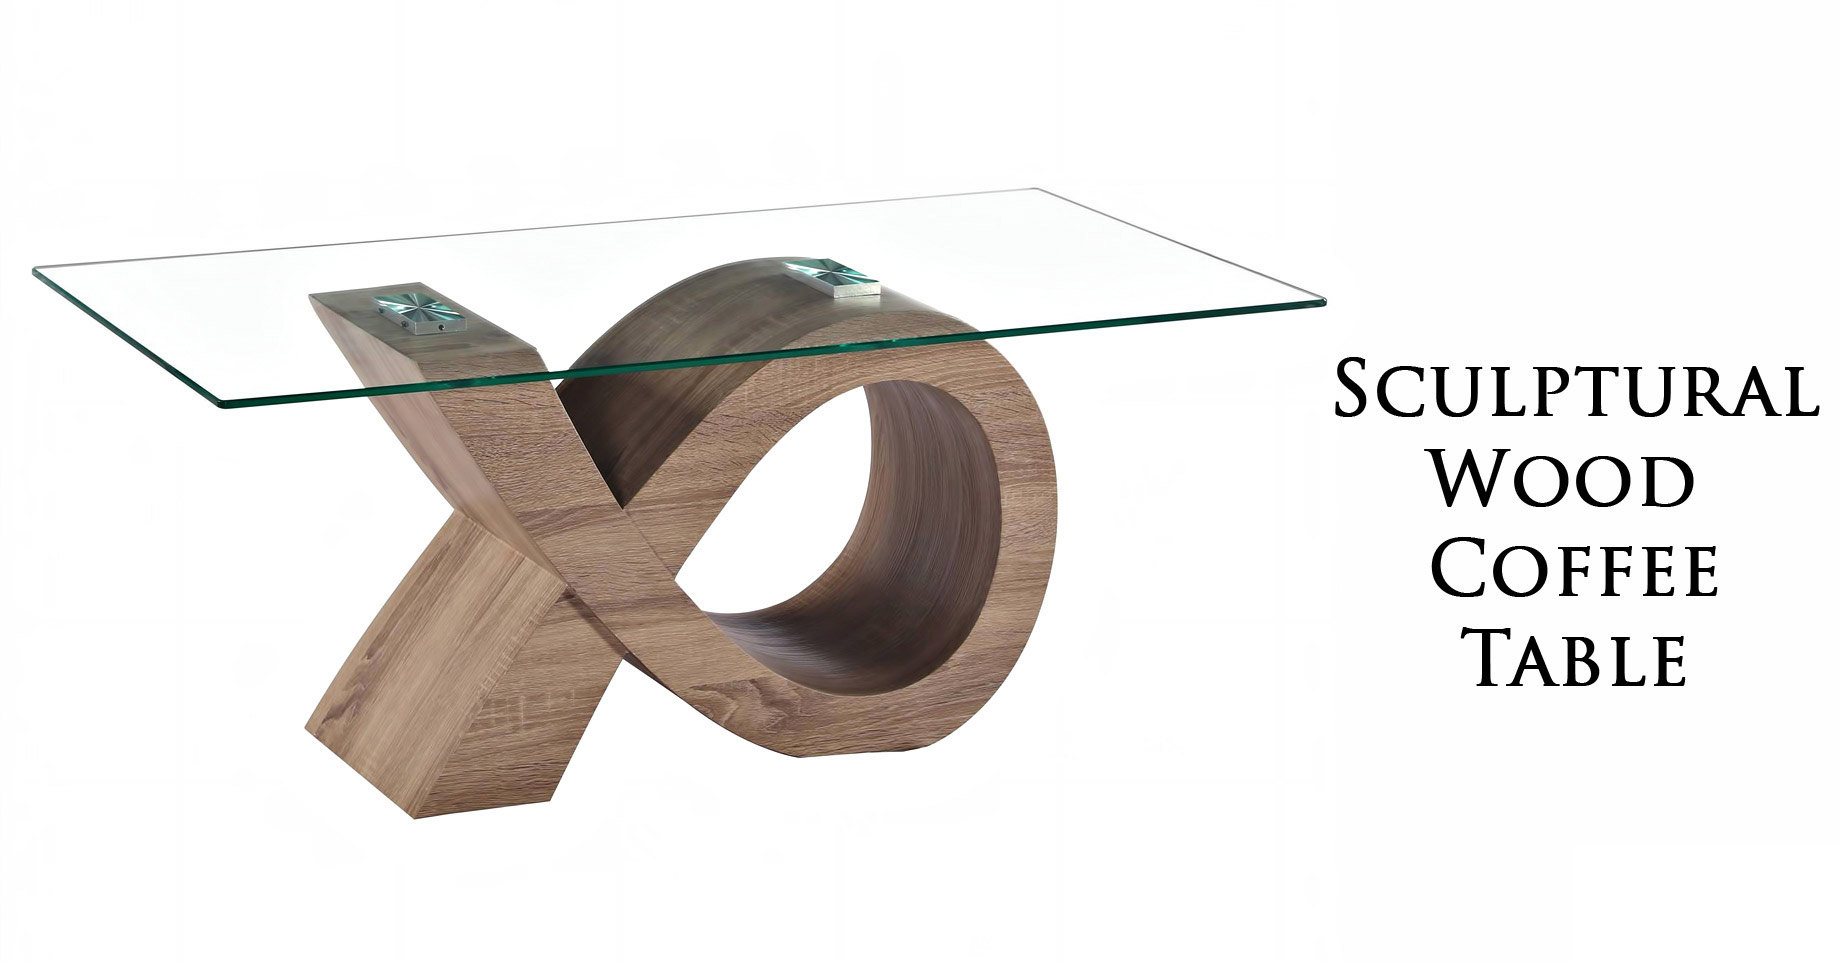 Sculptural Wood Glass Coffee Table